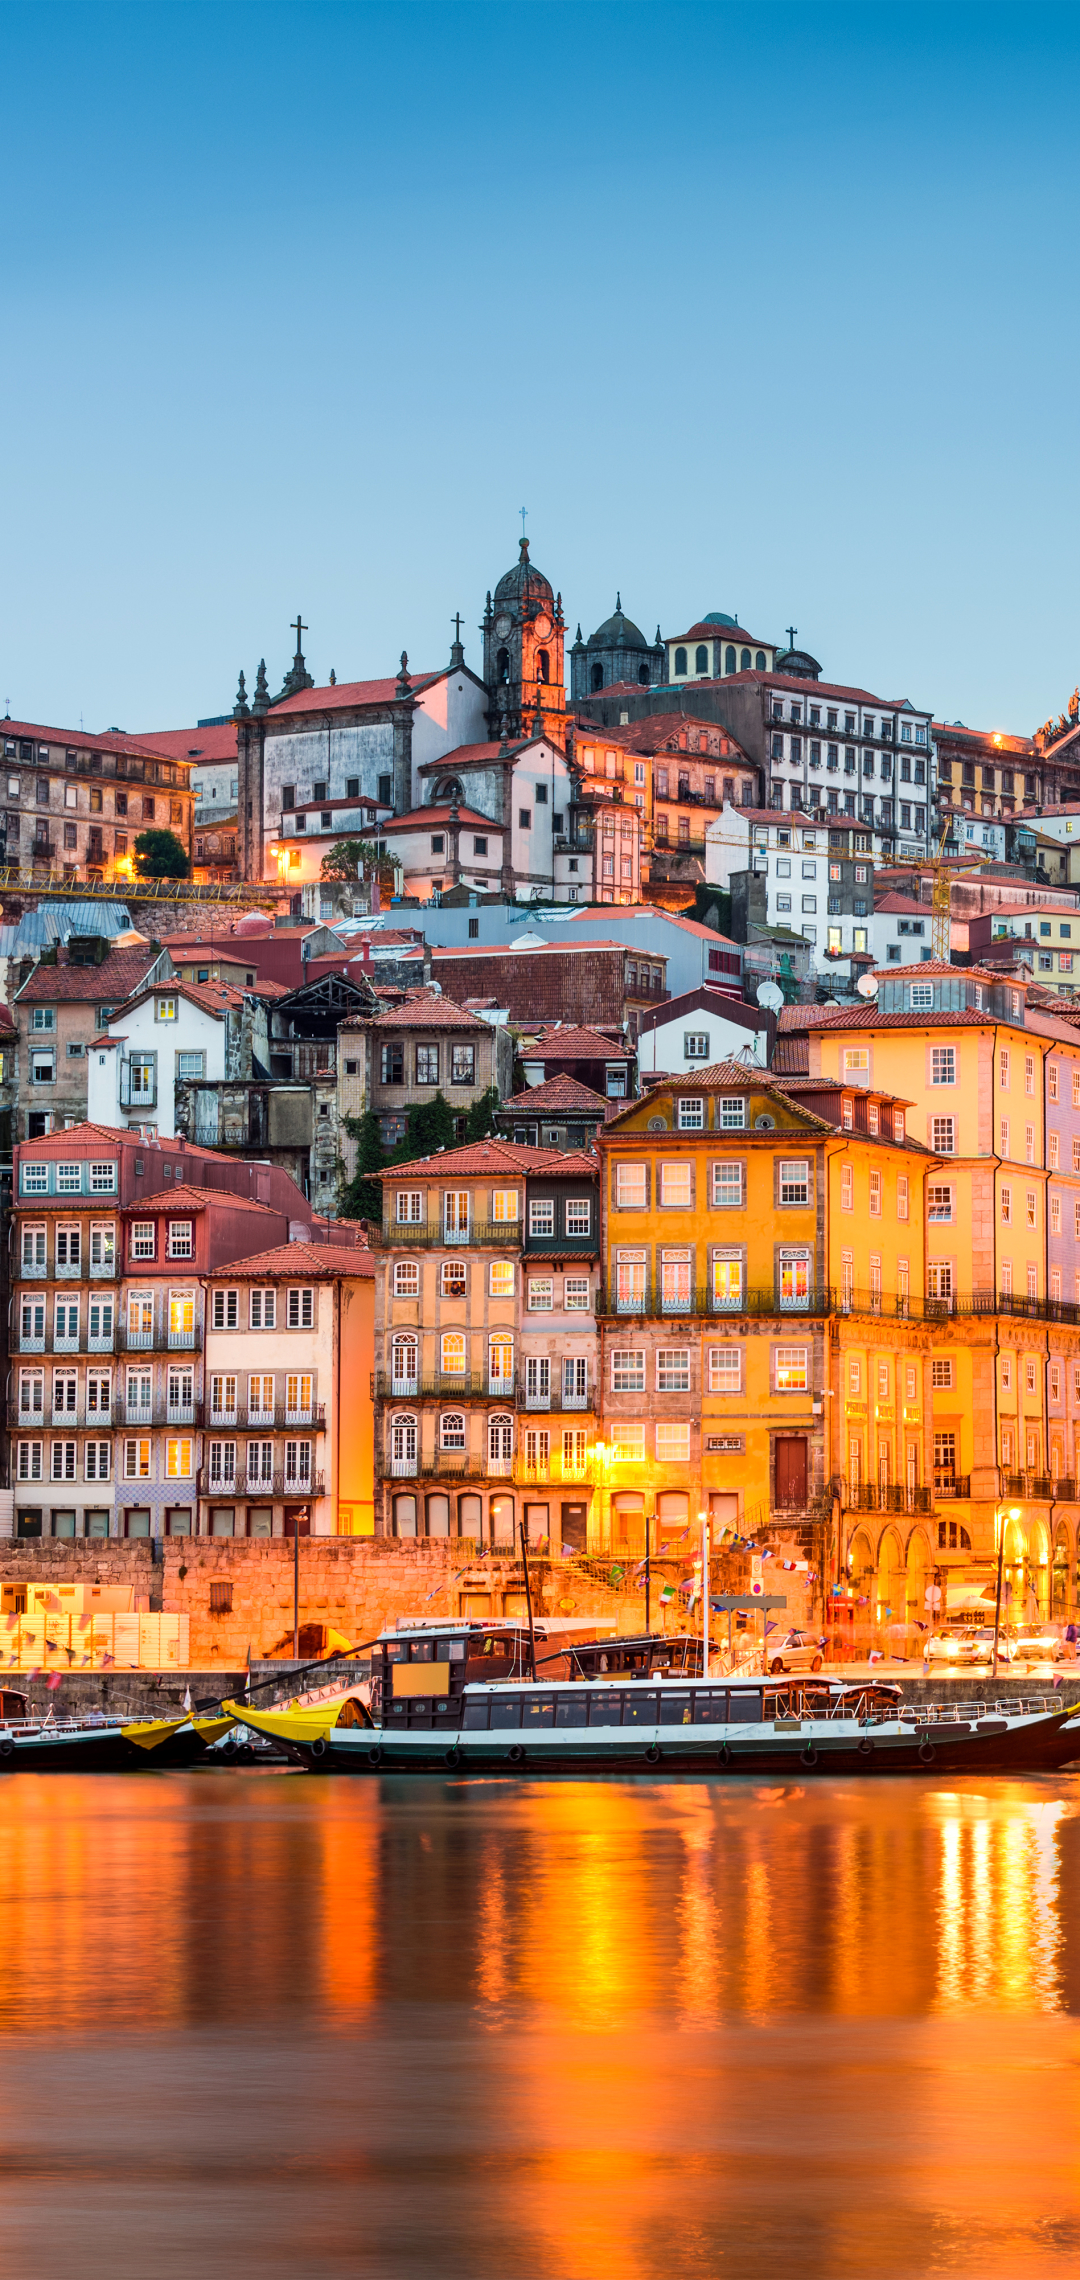 city, porto, portugal, man made, architecture, colorful, light, house, cities